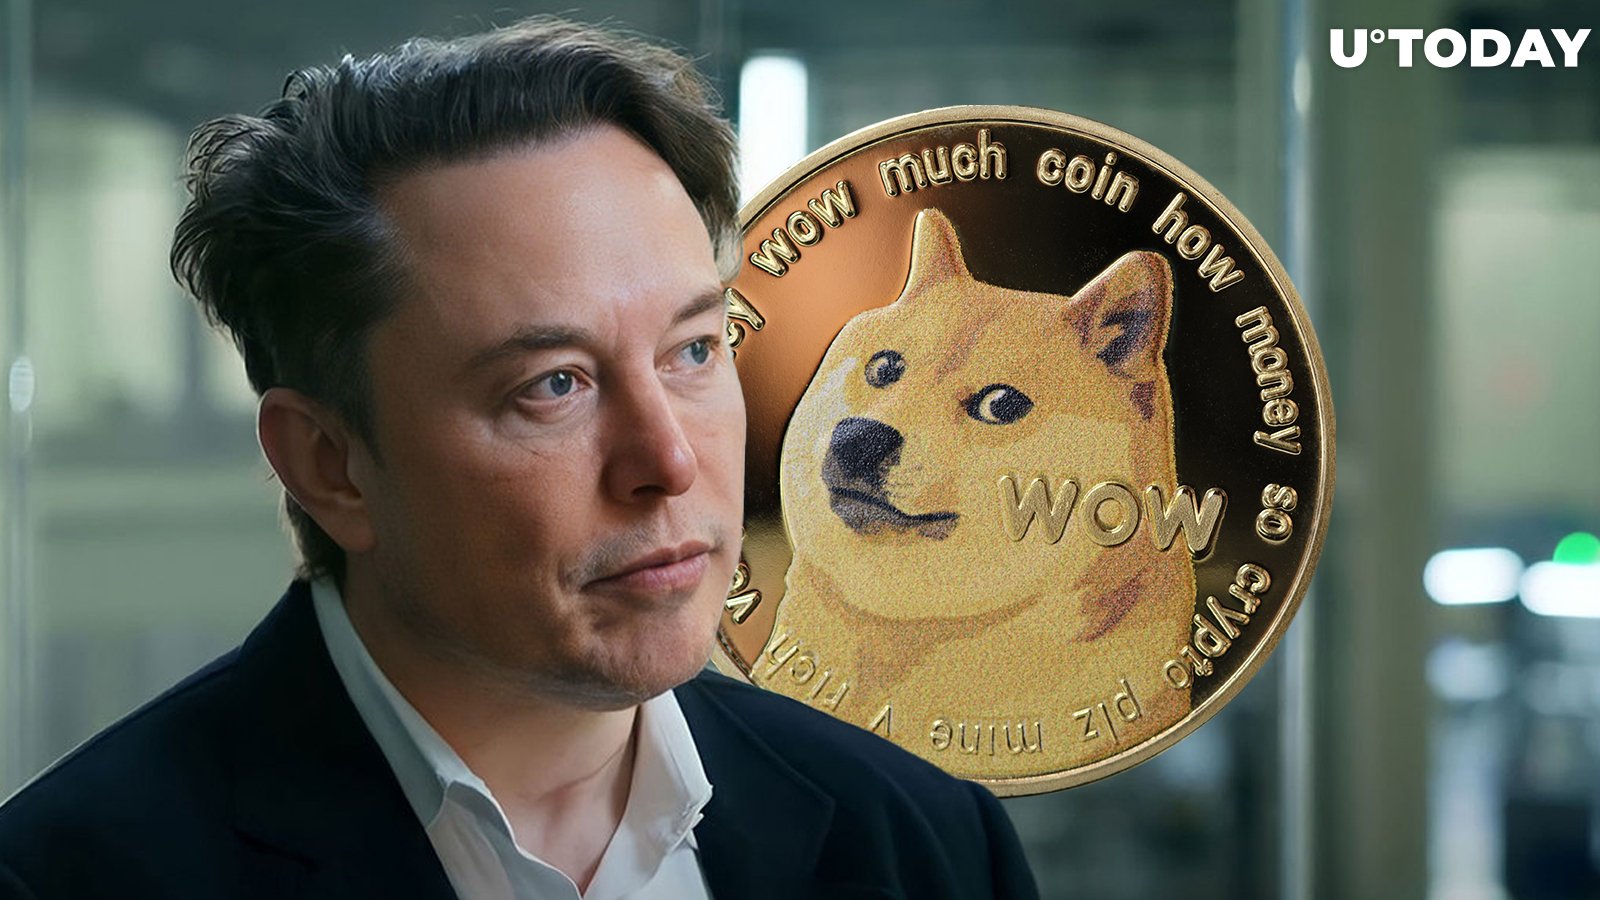 DOGE Will Be Added by Elon Musk for Twitter-'X' Payments, Raoul Pal Believes